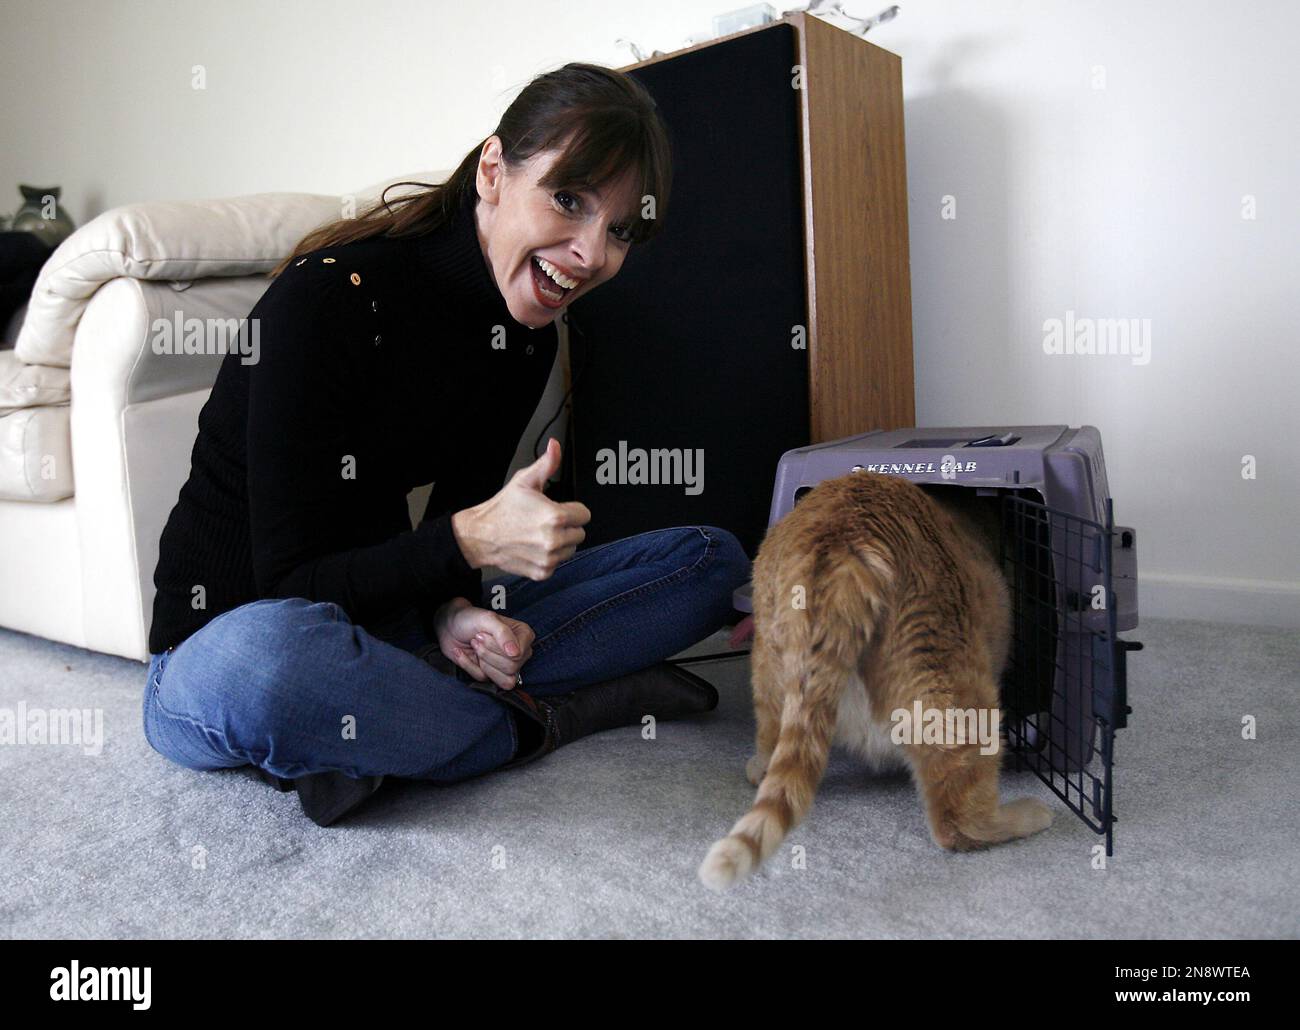 IMAGE DISTRIBUTED FOR BANFIELD PET HOSPITAL - ANIMAL PLANET pet trainer  Victoria Stilwell reacts after Danielle DeLozier's cat Pooh enters the cat  carrier successfully during an in-home training session on Wednesday, Oct.